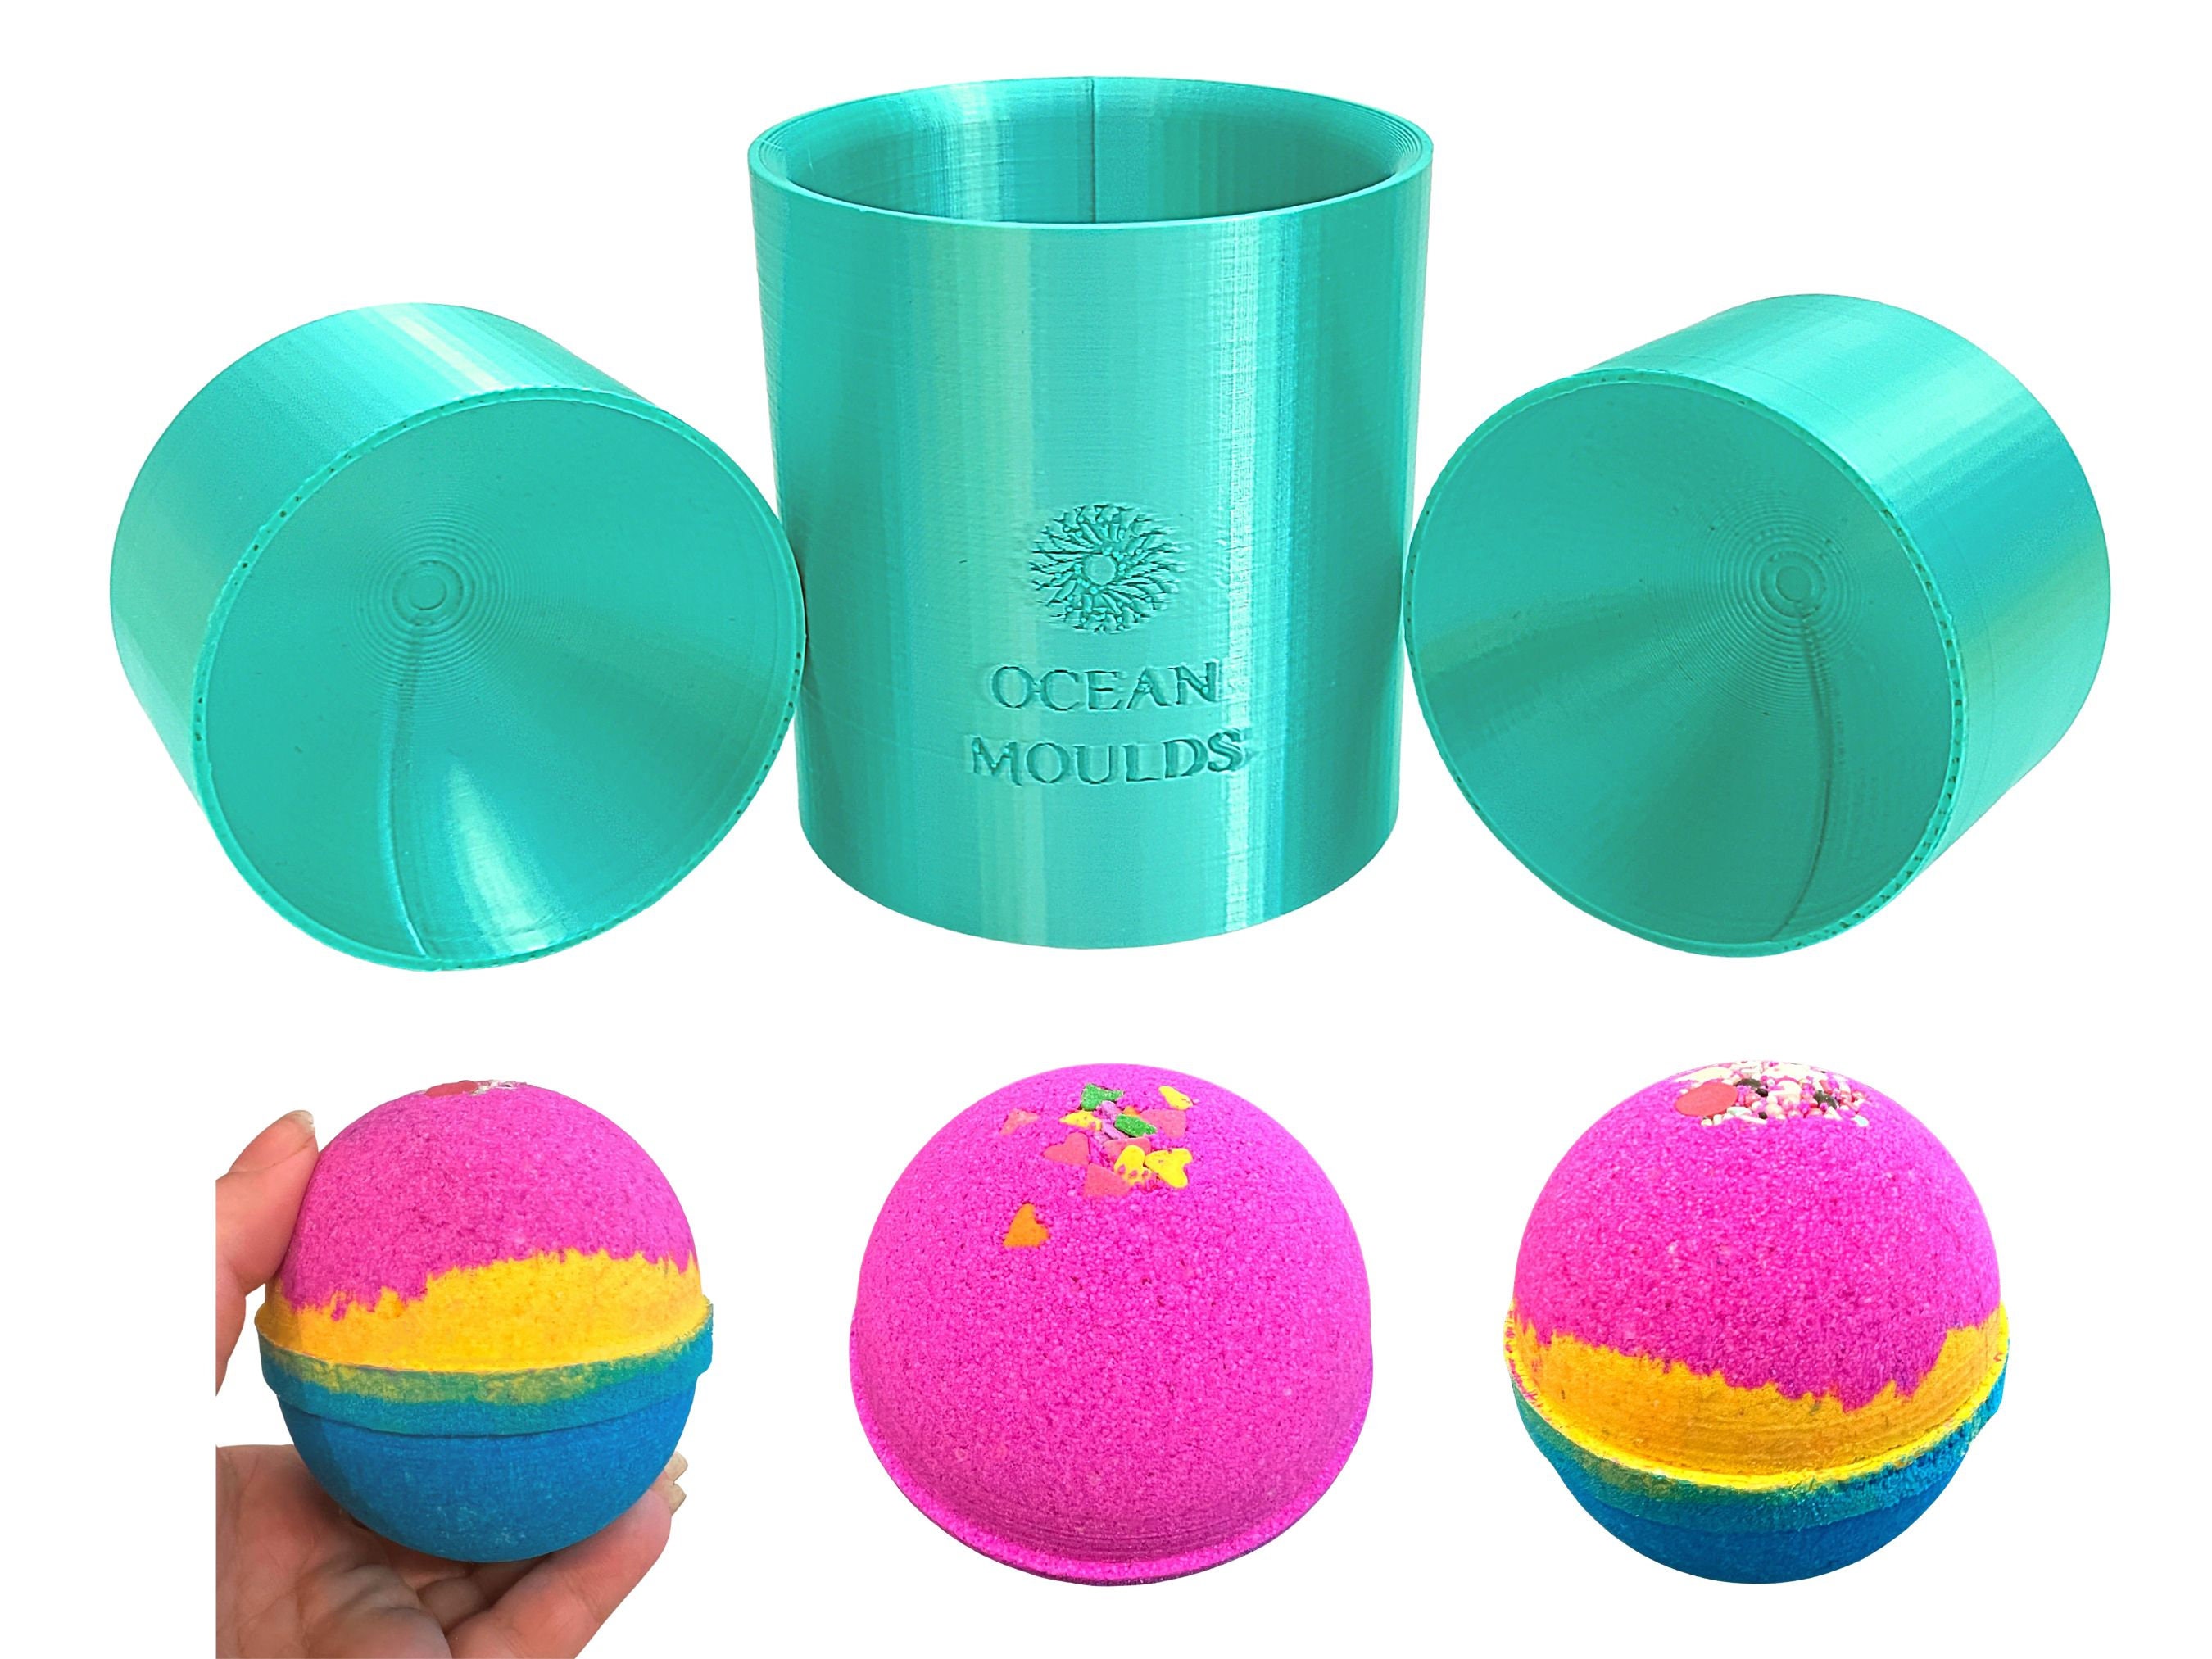 Stainless Steel Bath Bomb Mold 1.95 